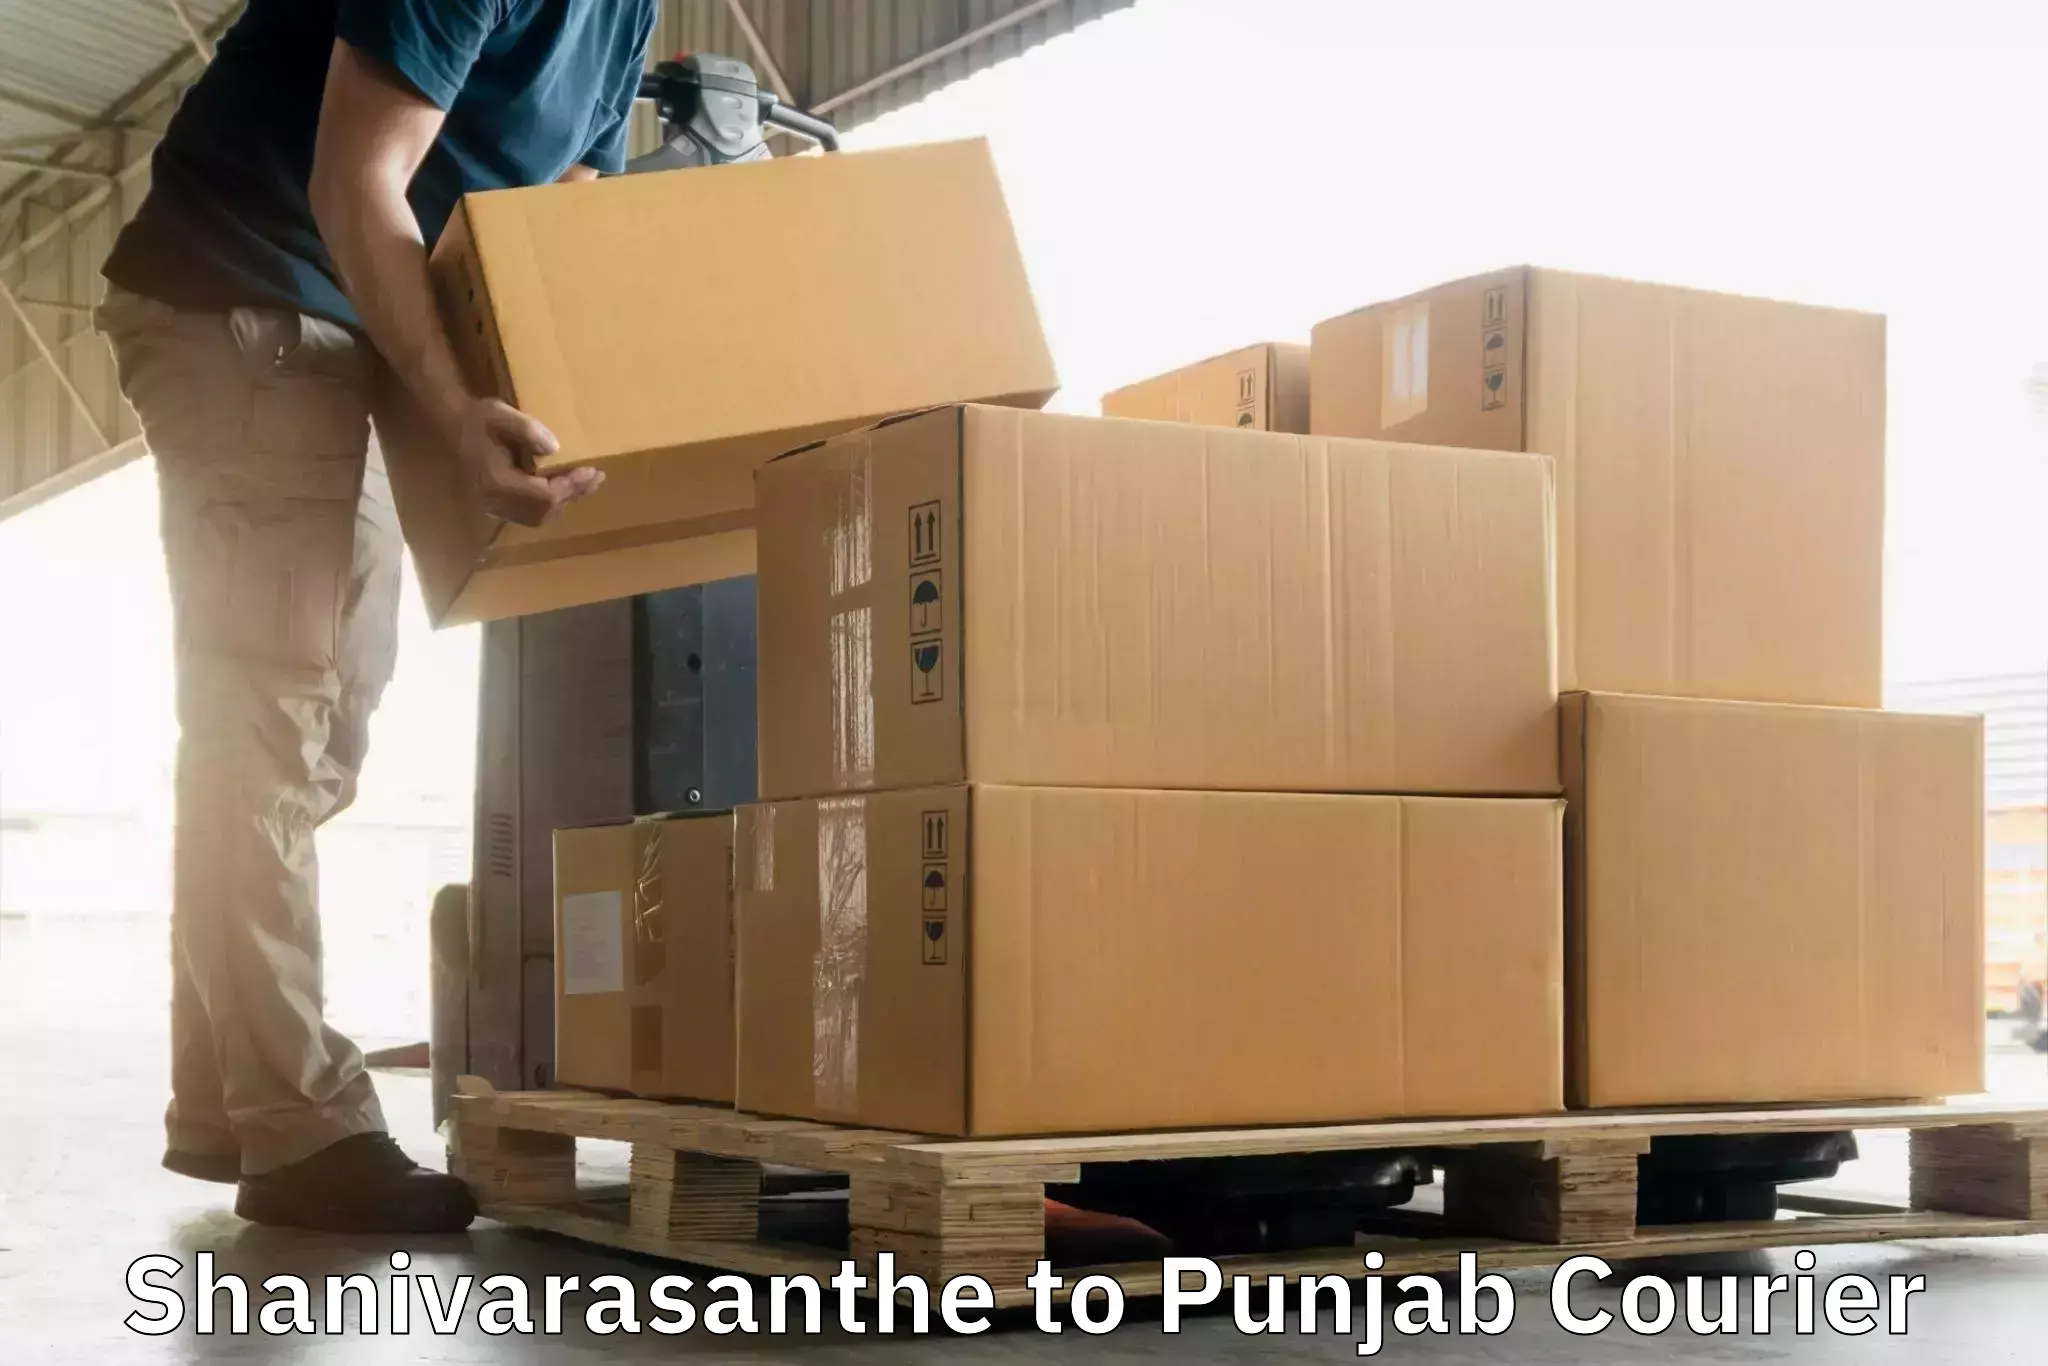 Multi-national courier services Shanivarasanthe to Dhuri